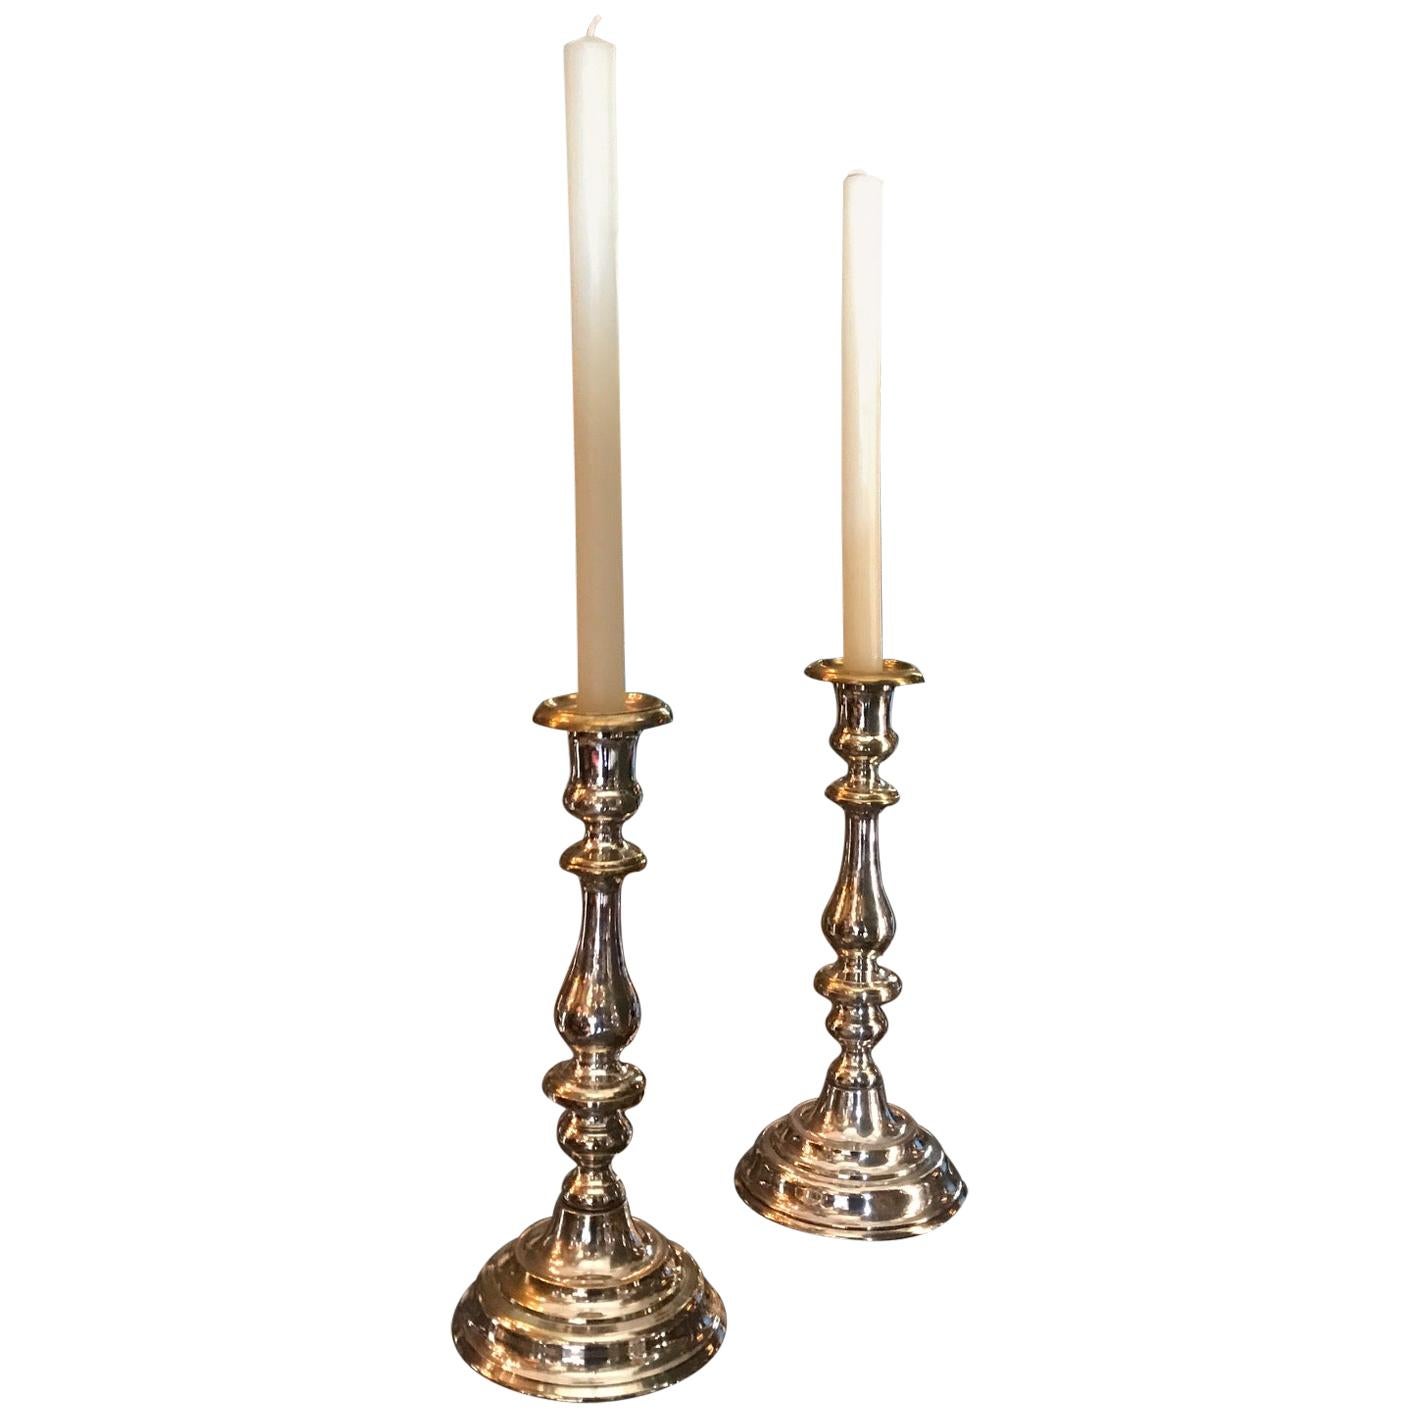 19th Century Candlesticks Candleholder Silver Plated Decorative Object, LA, Pair